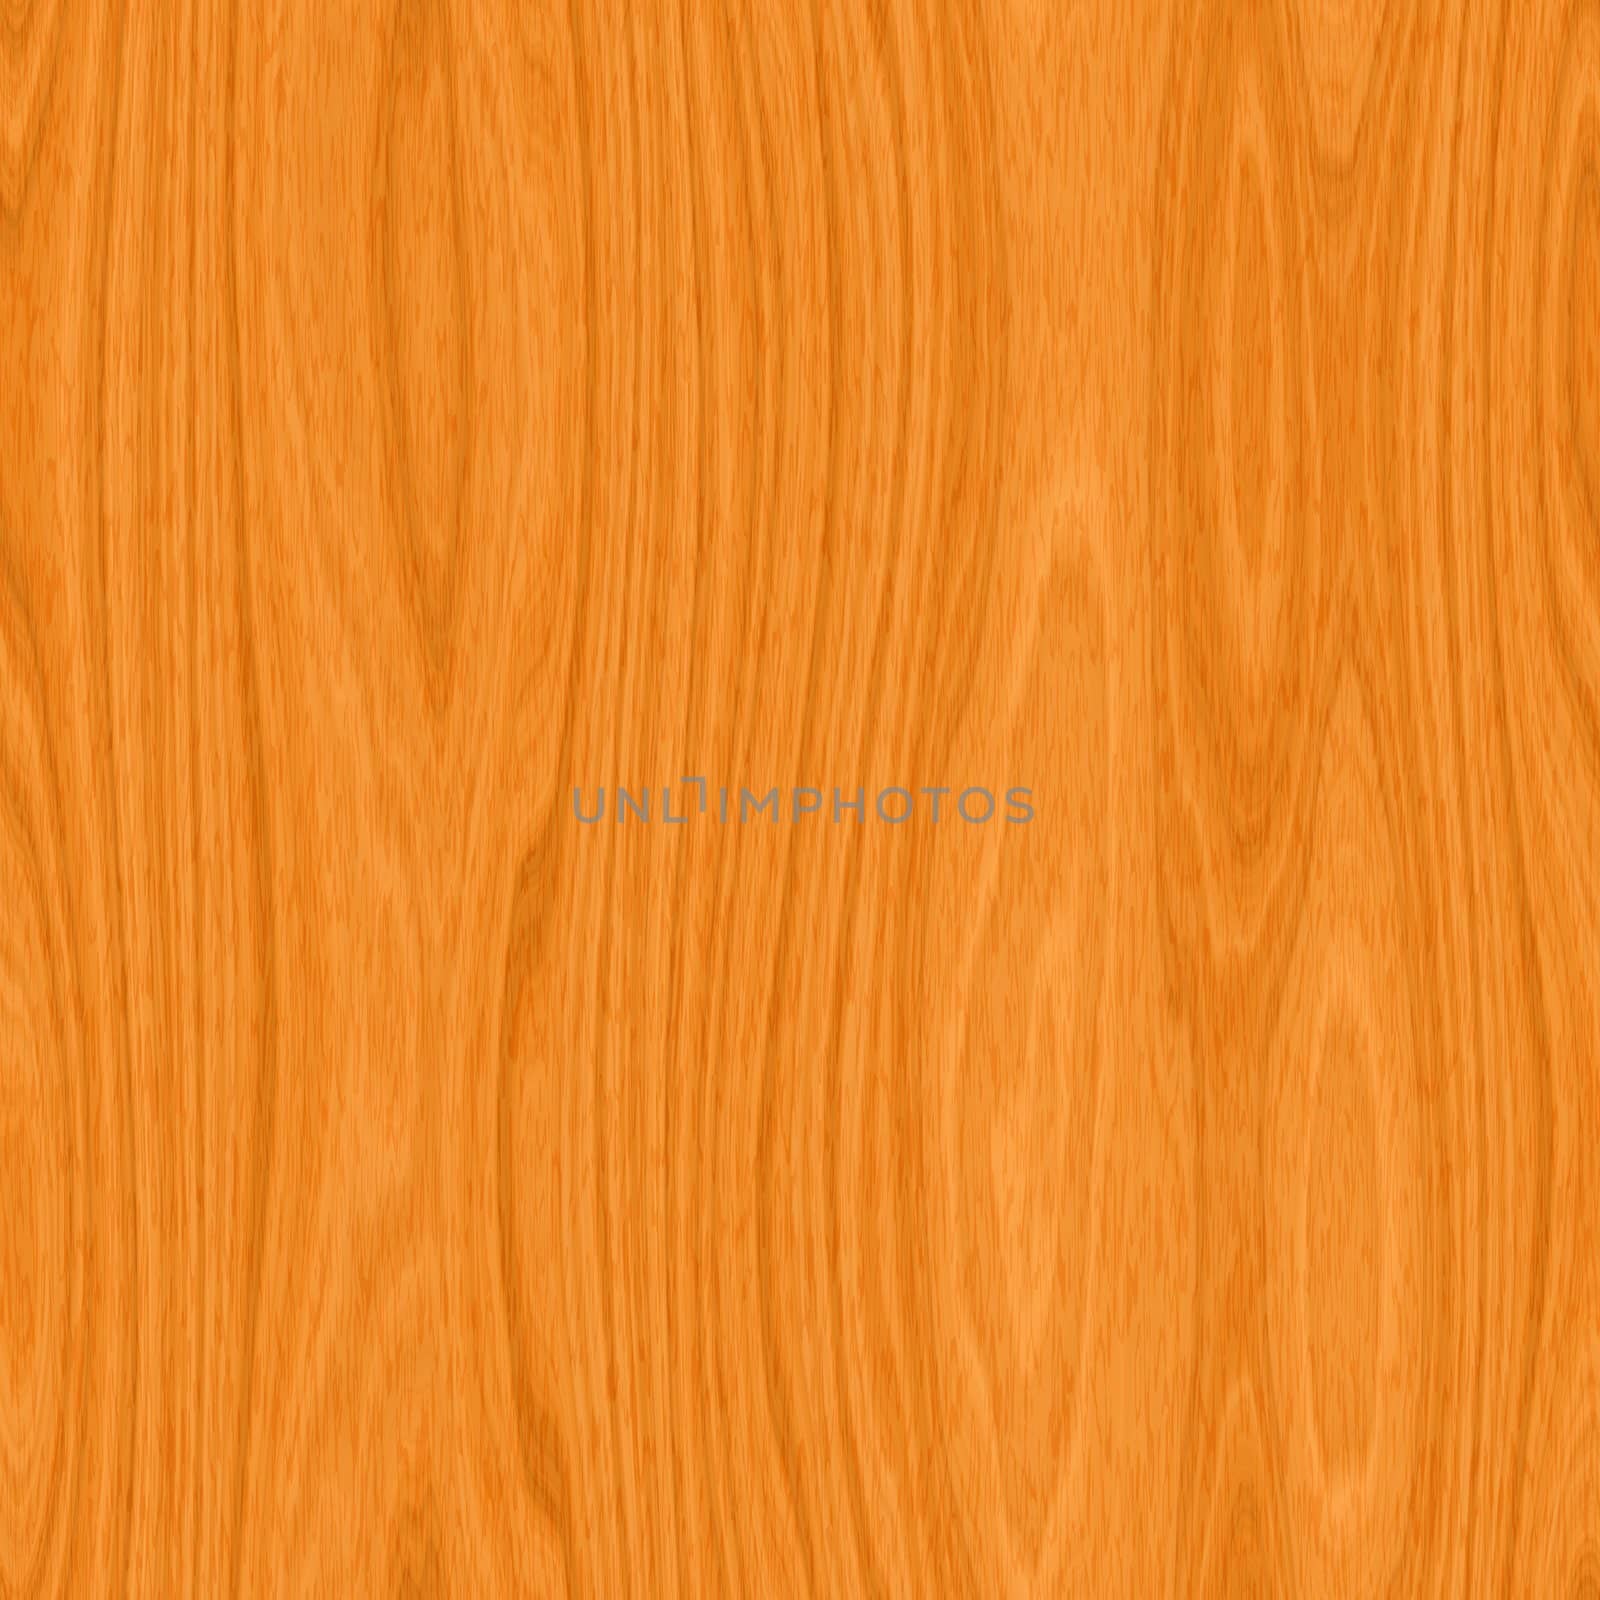 pine wood by clearviewstock